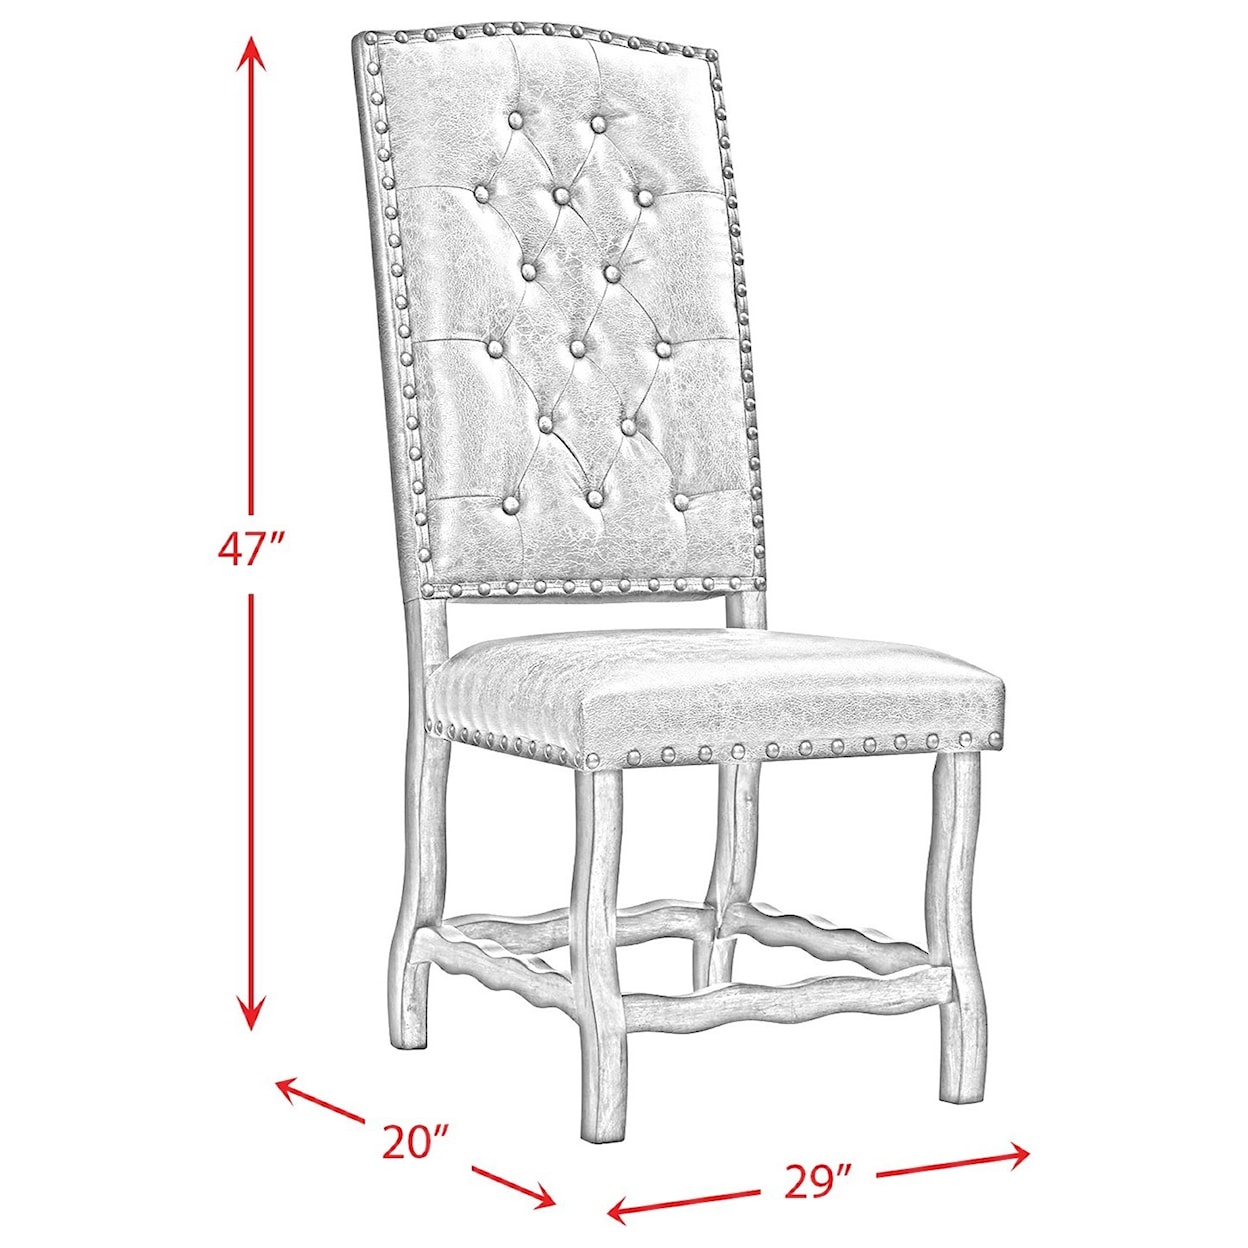 Elements International Gramercy Tufted Tall Back Side Chair